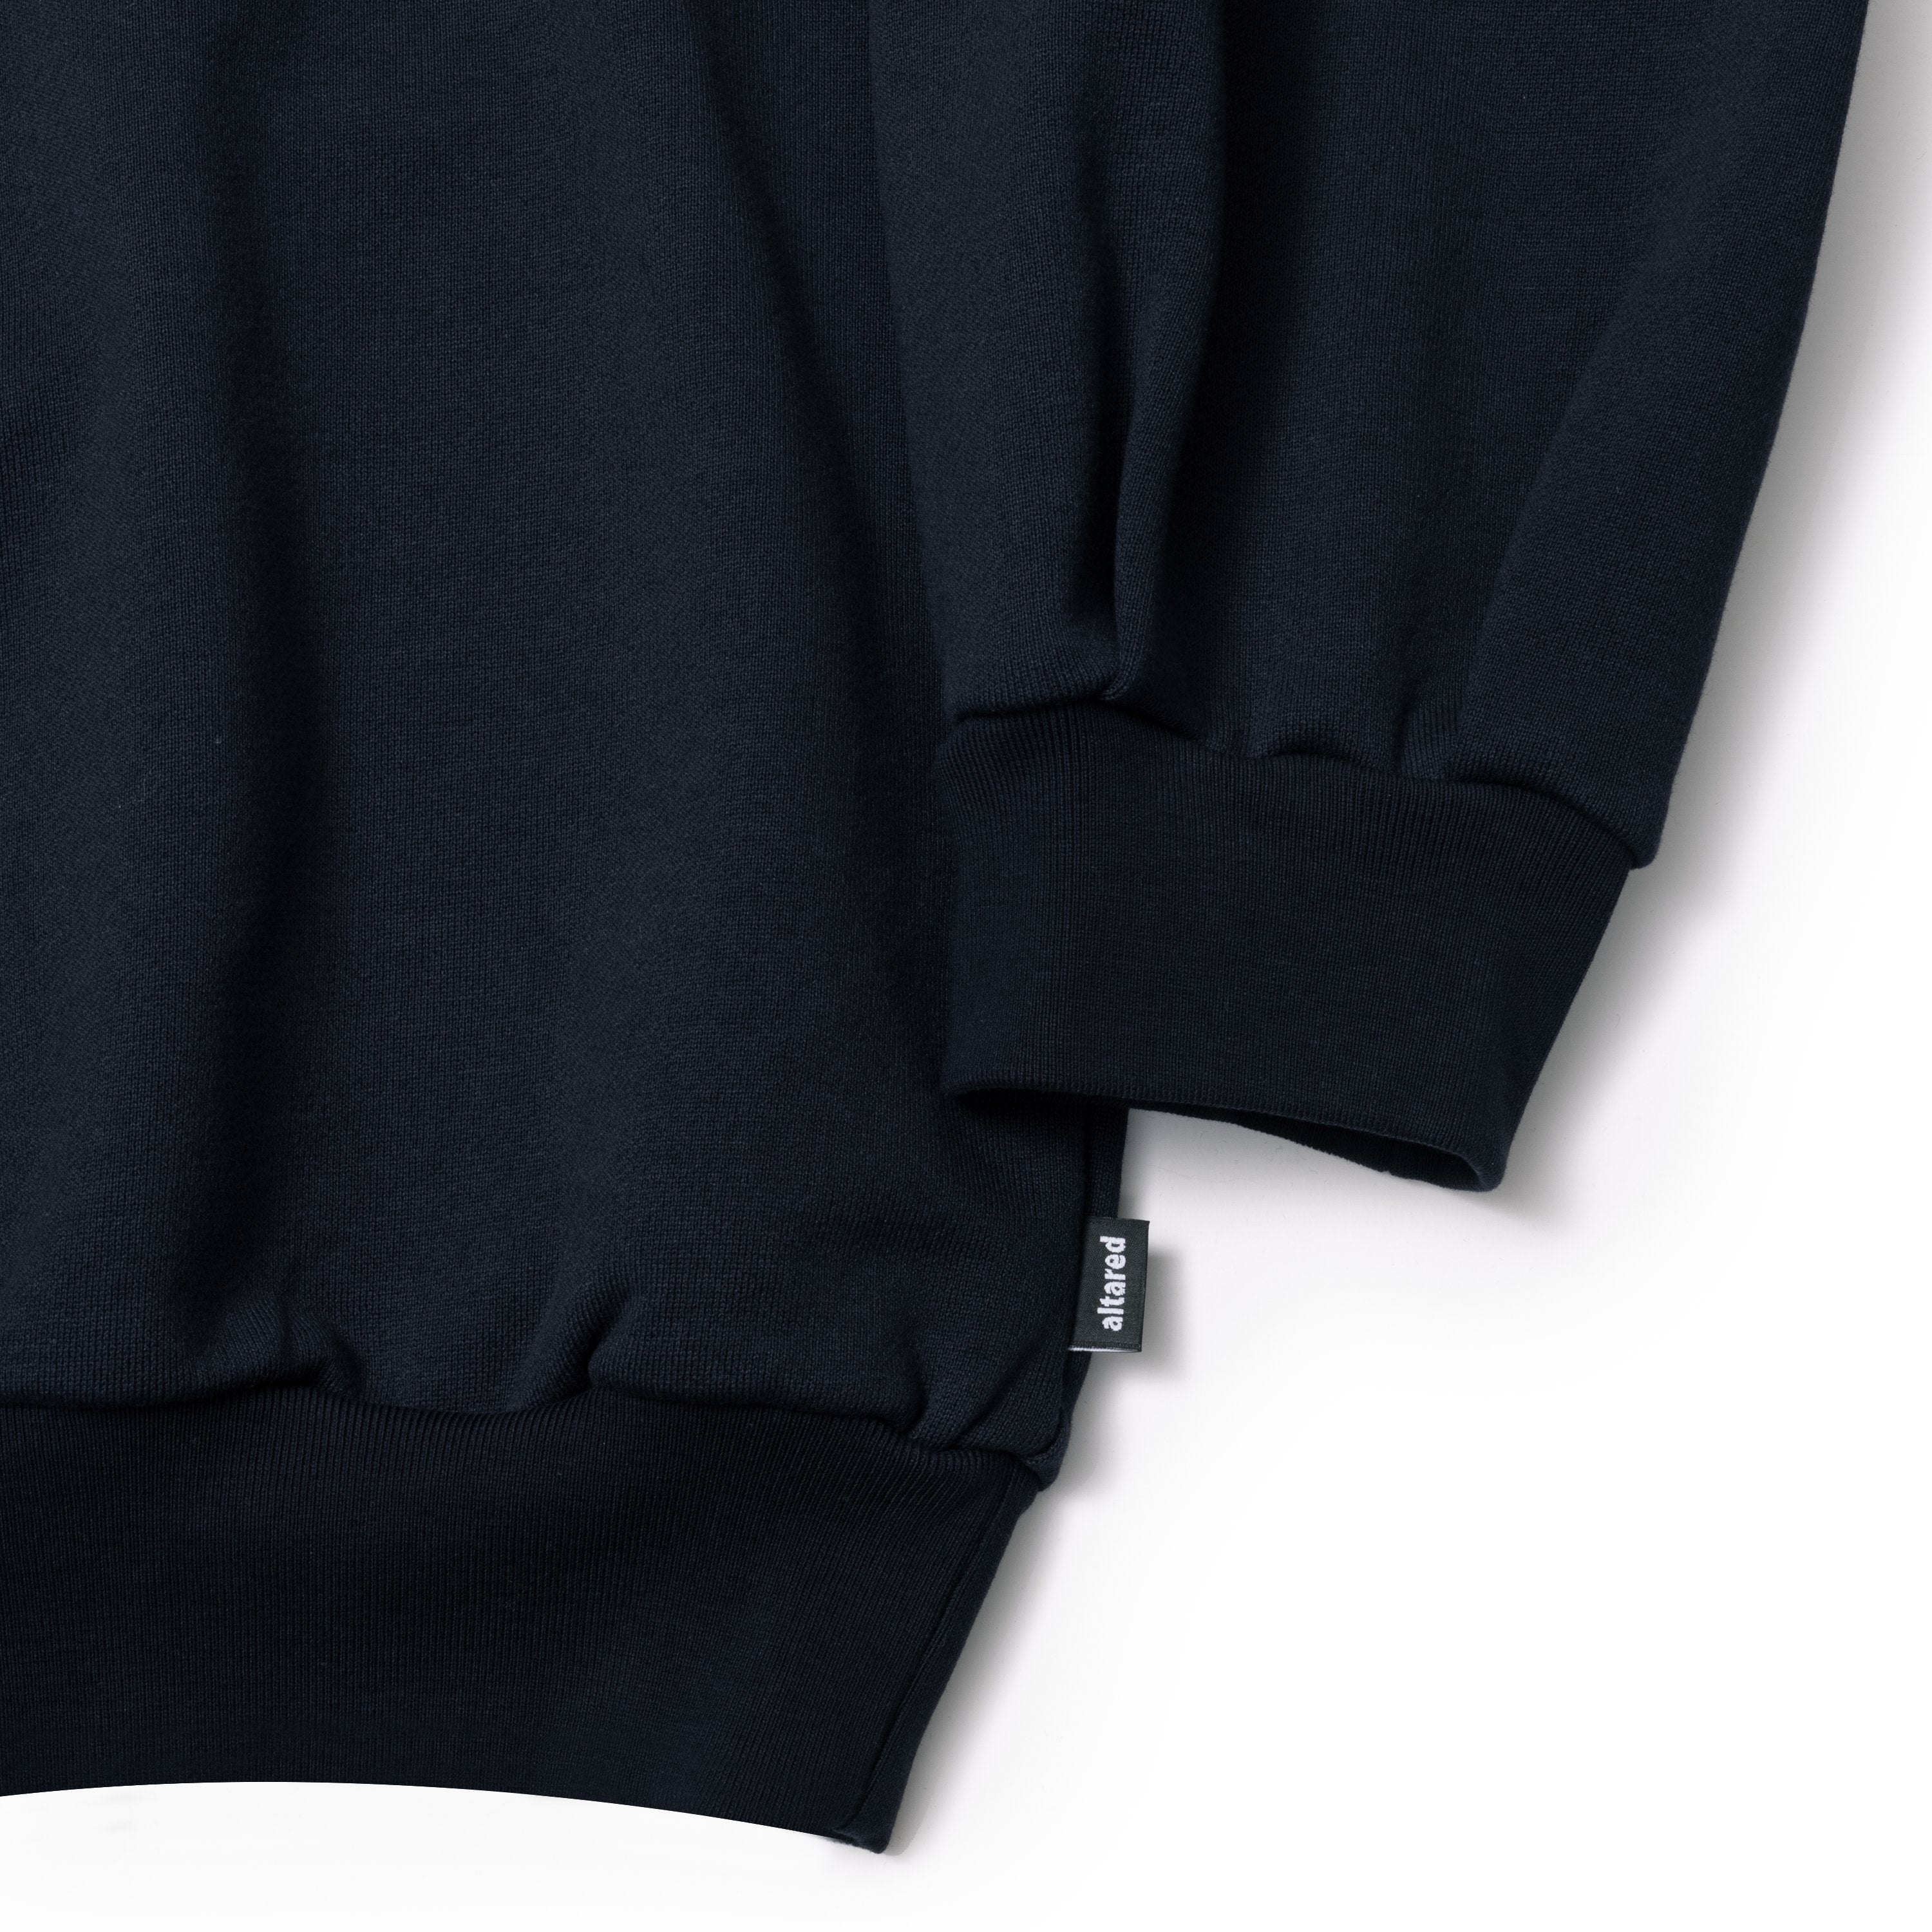 altared/Logo 3D Embroidery Pleated Sleeve Crew Neck Sweat[NAVY]